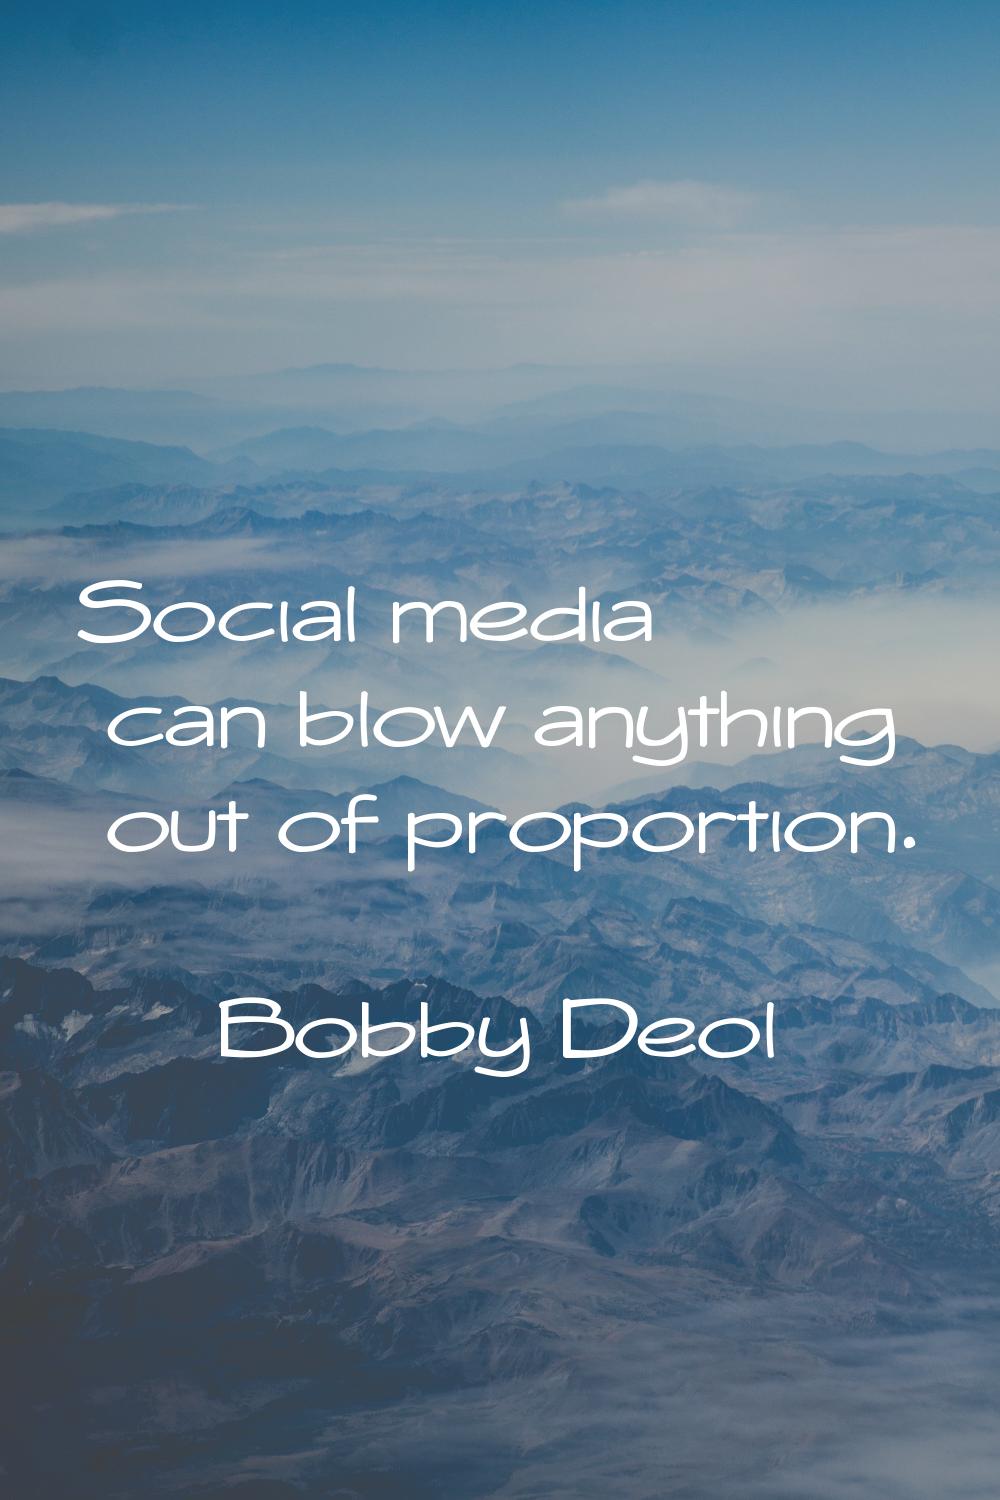 Social media can blow anything out of proportion.